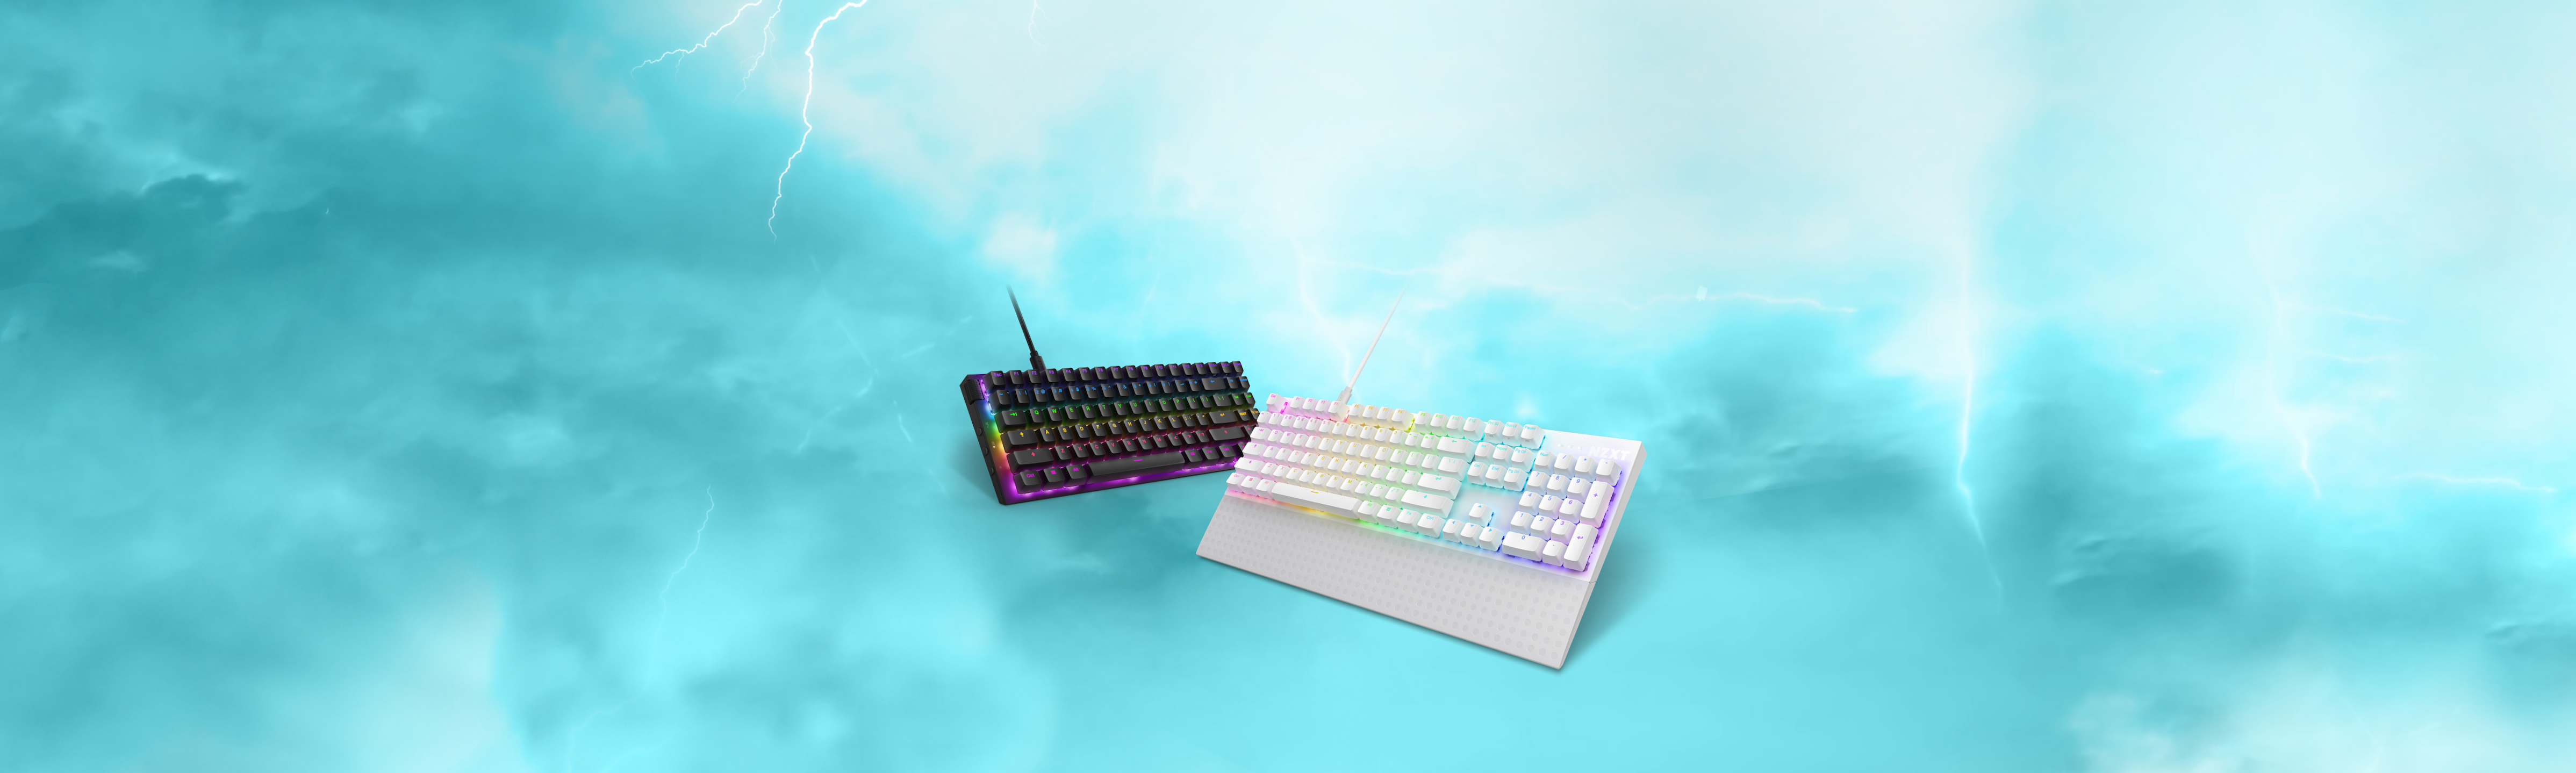 Function 2 Full and MiniTKL Keyboard Stormy Clouds Background